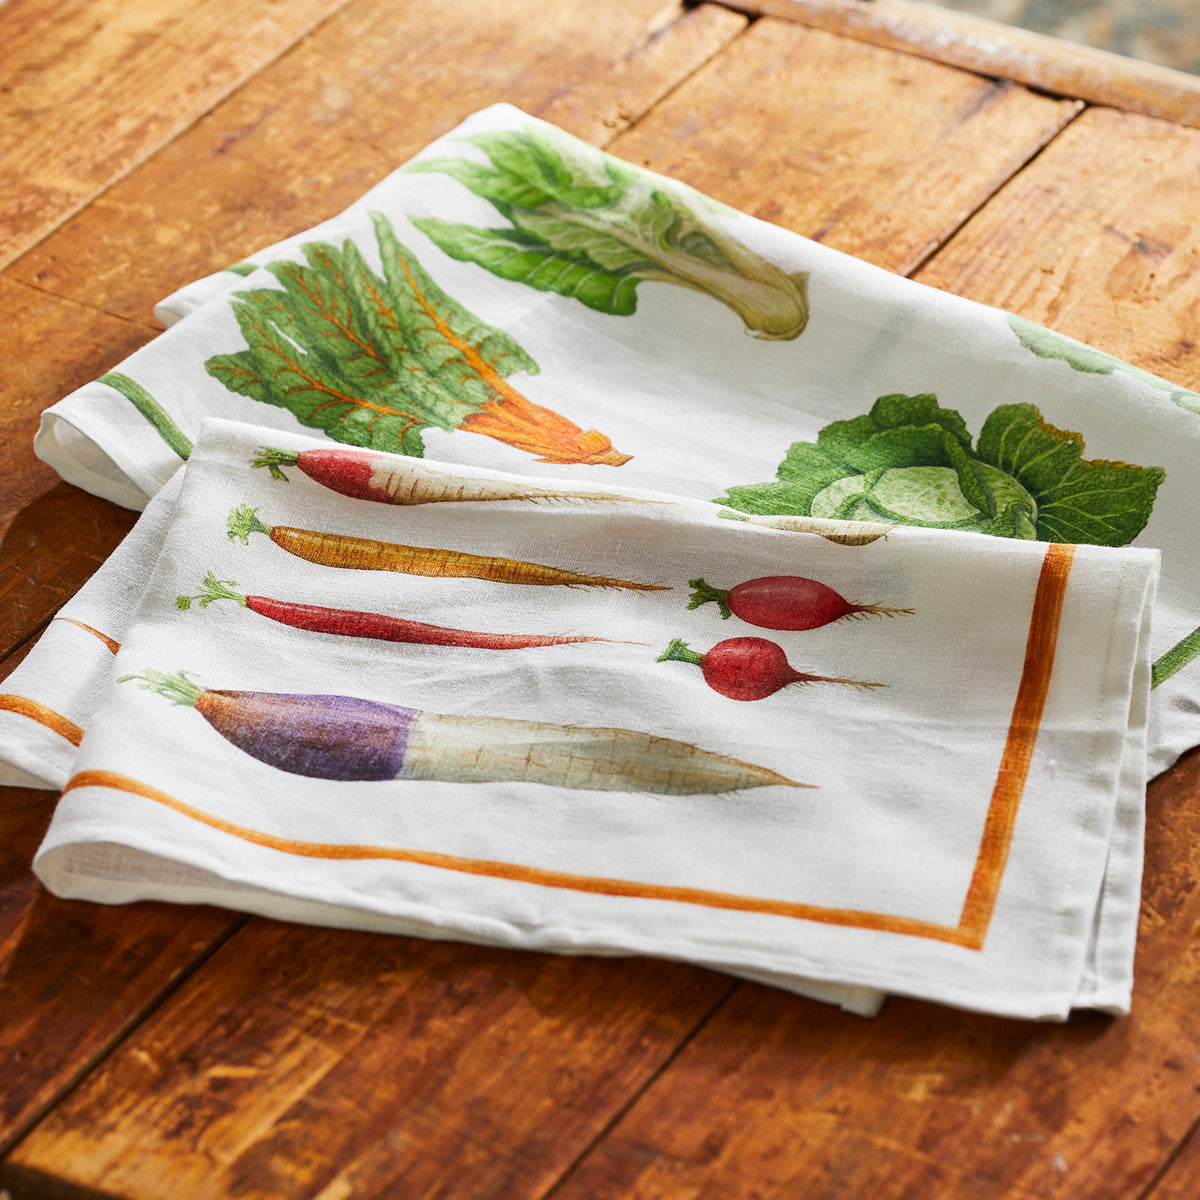 Two Veggies Linen Kitchen Towels with fresh veggies on them on a wooden table. (Brand: TTT)